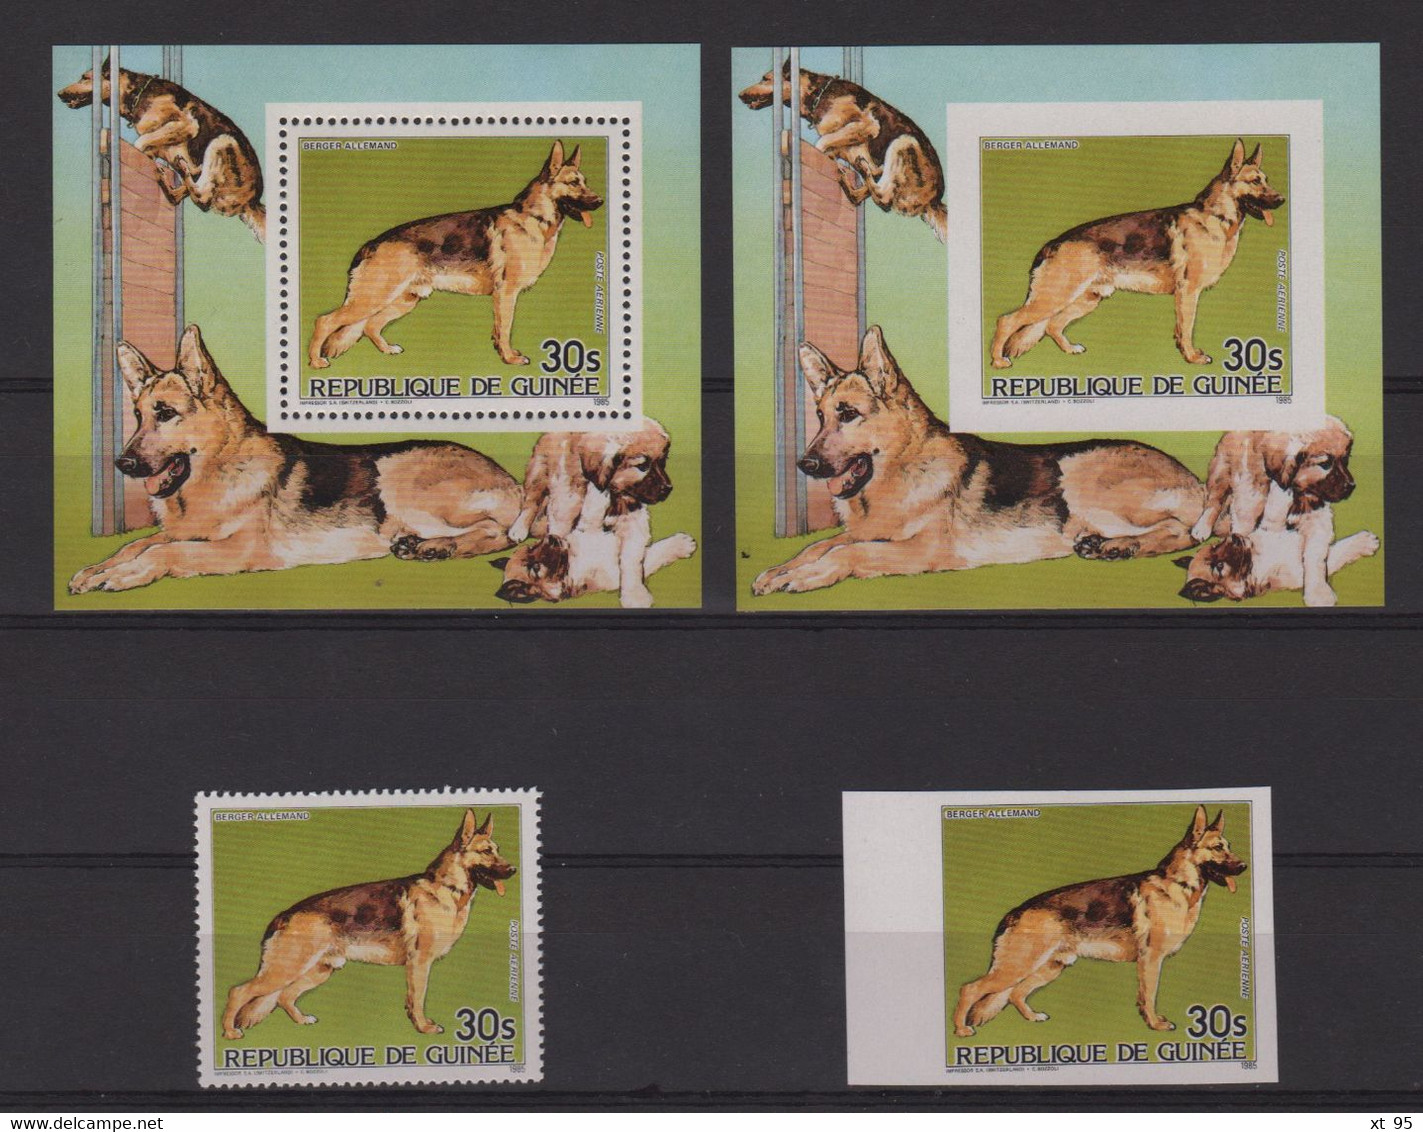 Guinee - PA N°185 Timbre + Bf Denteles Non Denteles - Faune Chien - Berger Allemand - ** Neuf Sans Charniere - Guinea (1958-...)